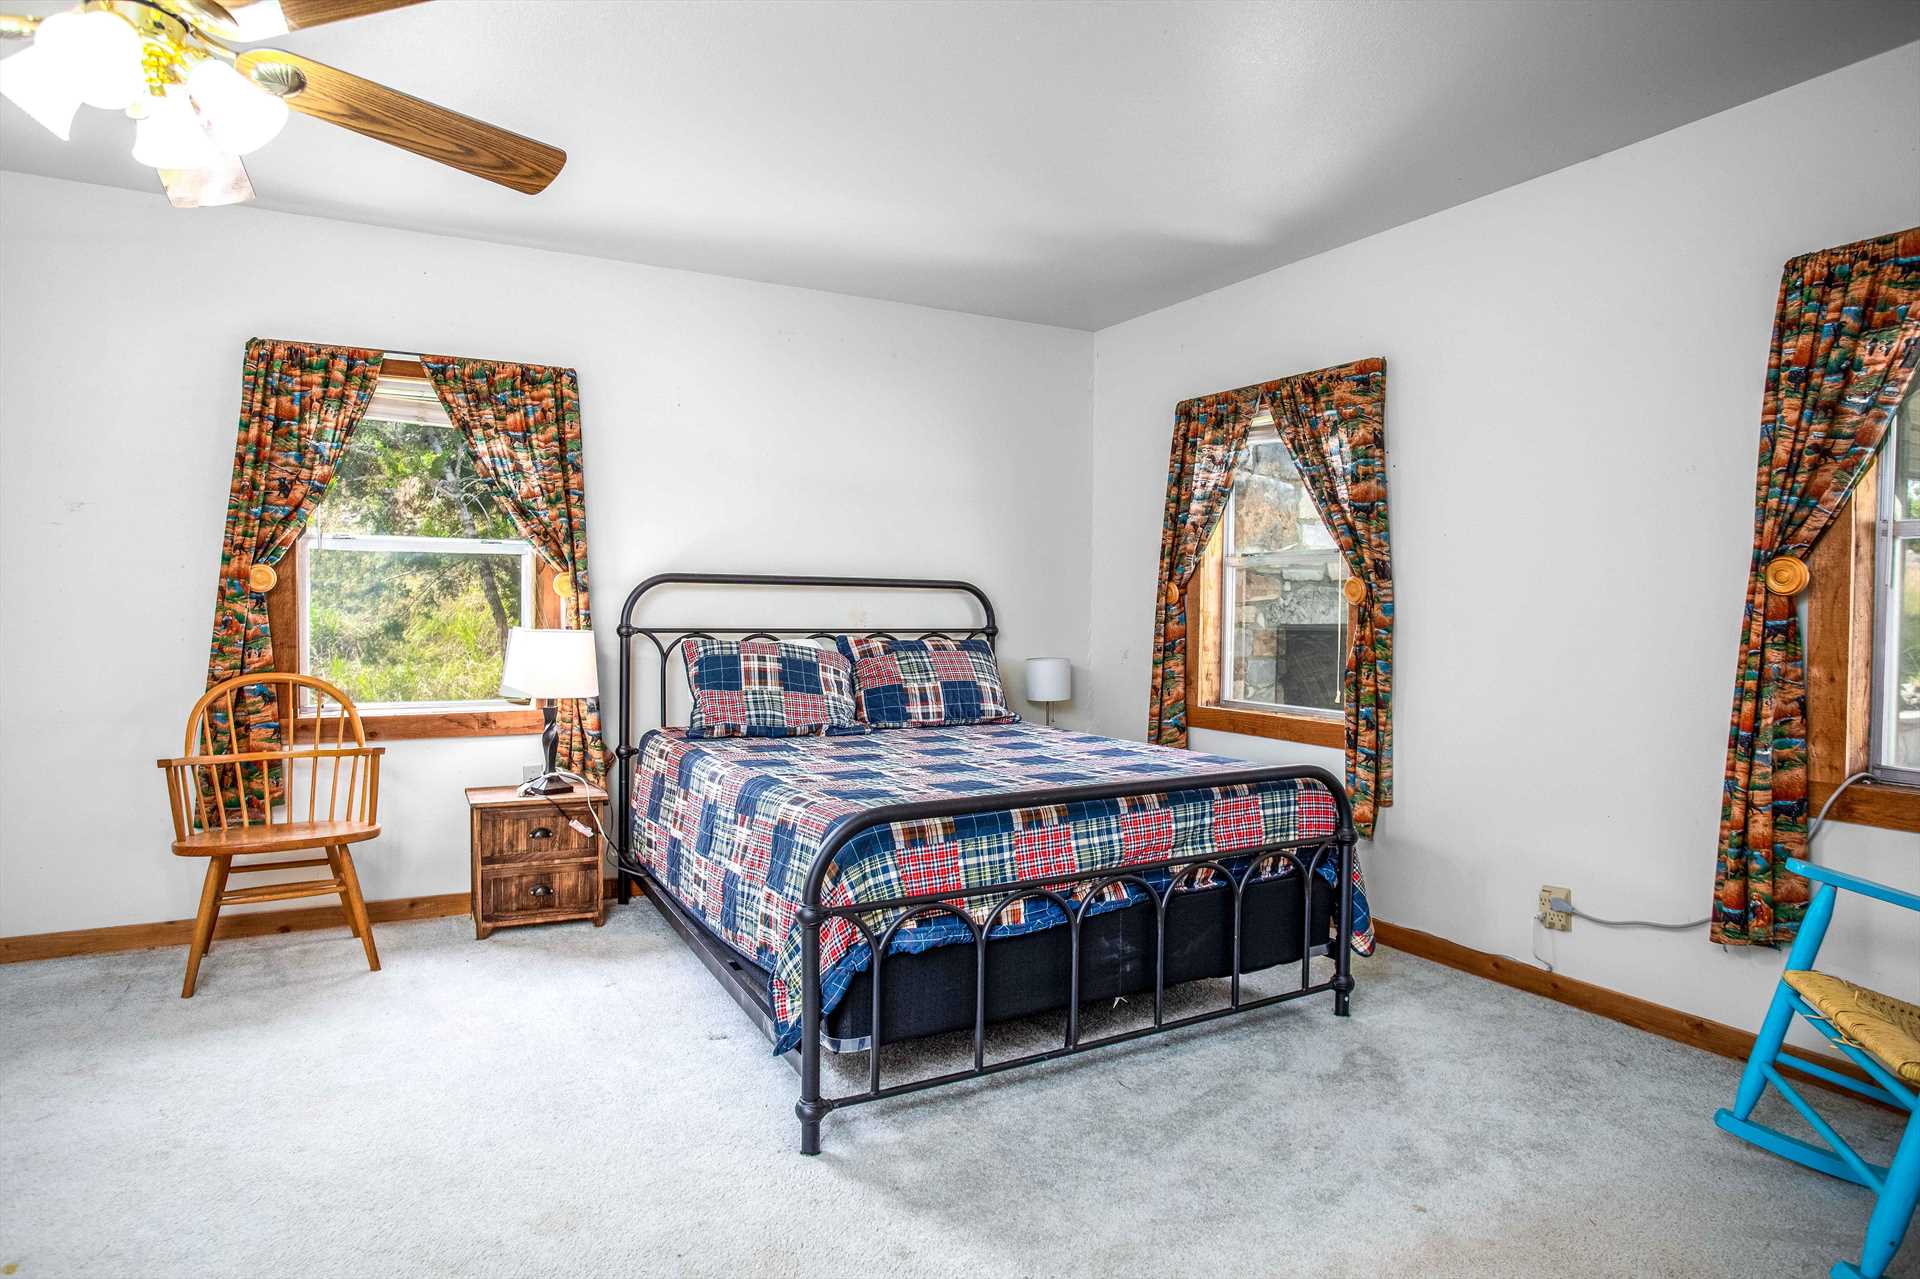                                                 The roomy second bedroom in the Hill House includes a plush and comfy star-spangled queen-sized bed!